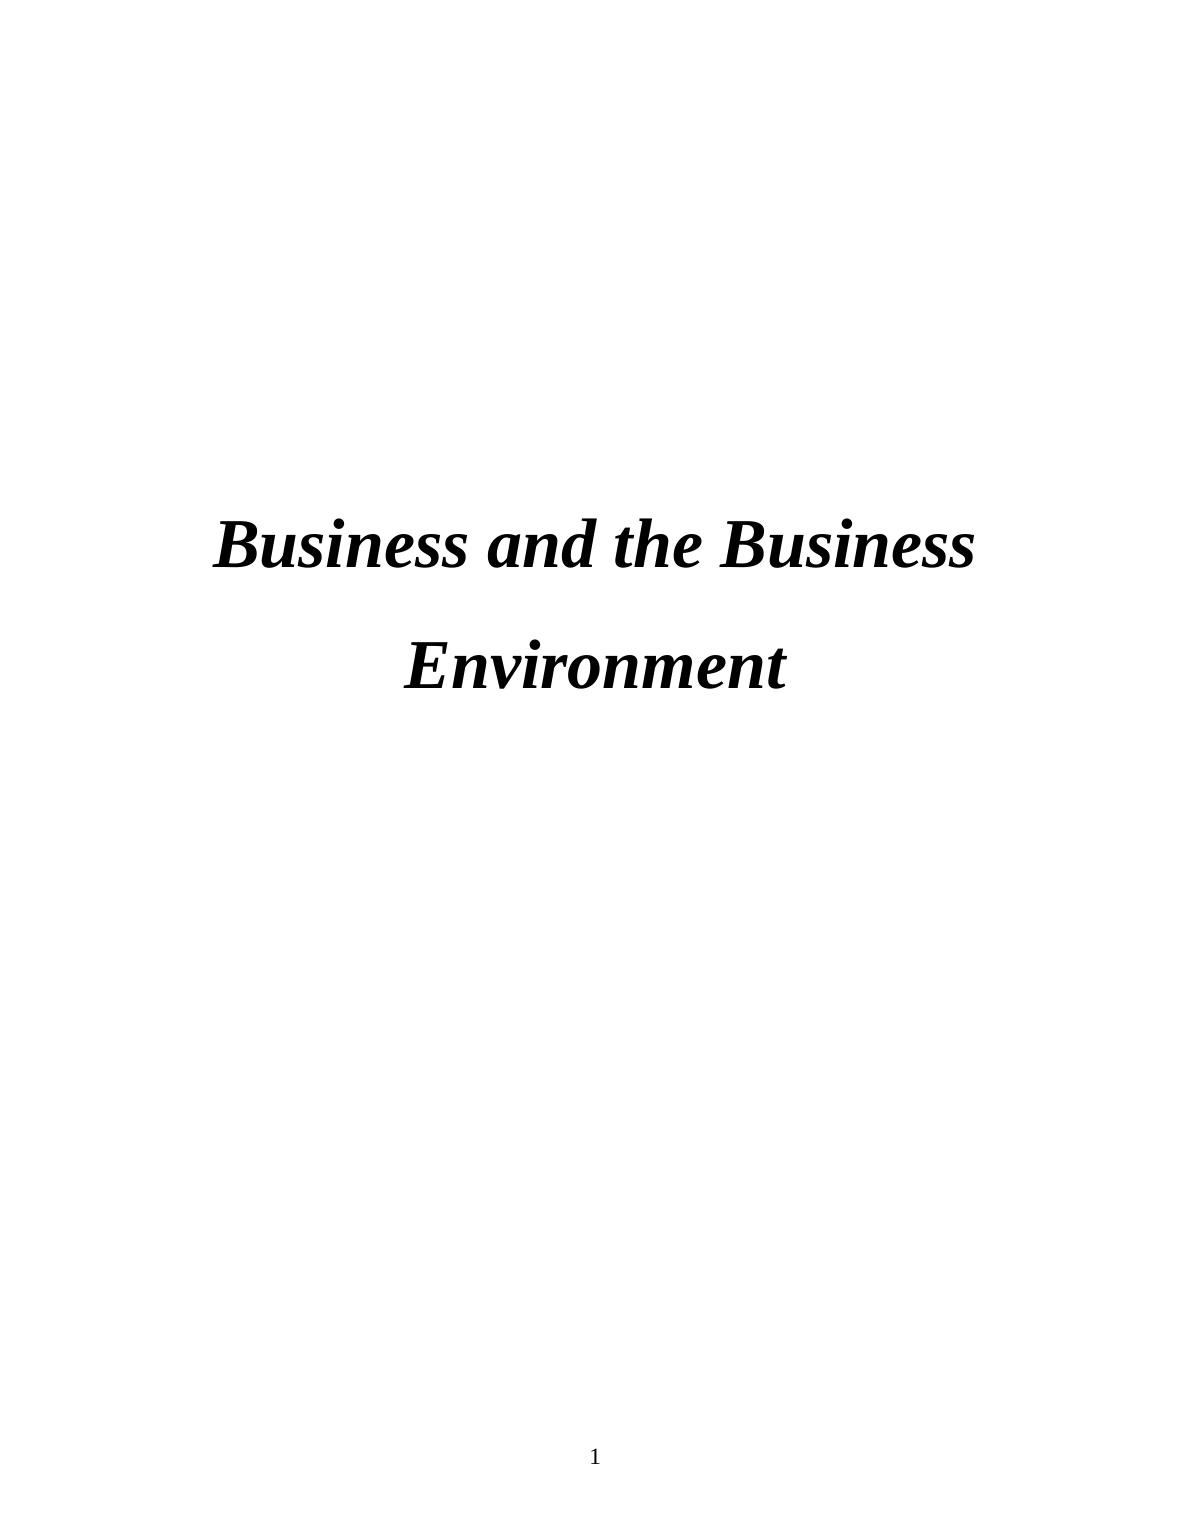 Business and the Business Environment  -  Unilever Assignment_1